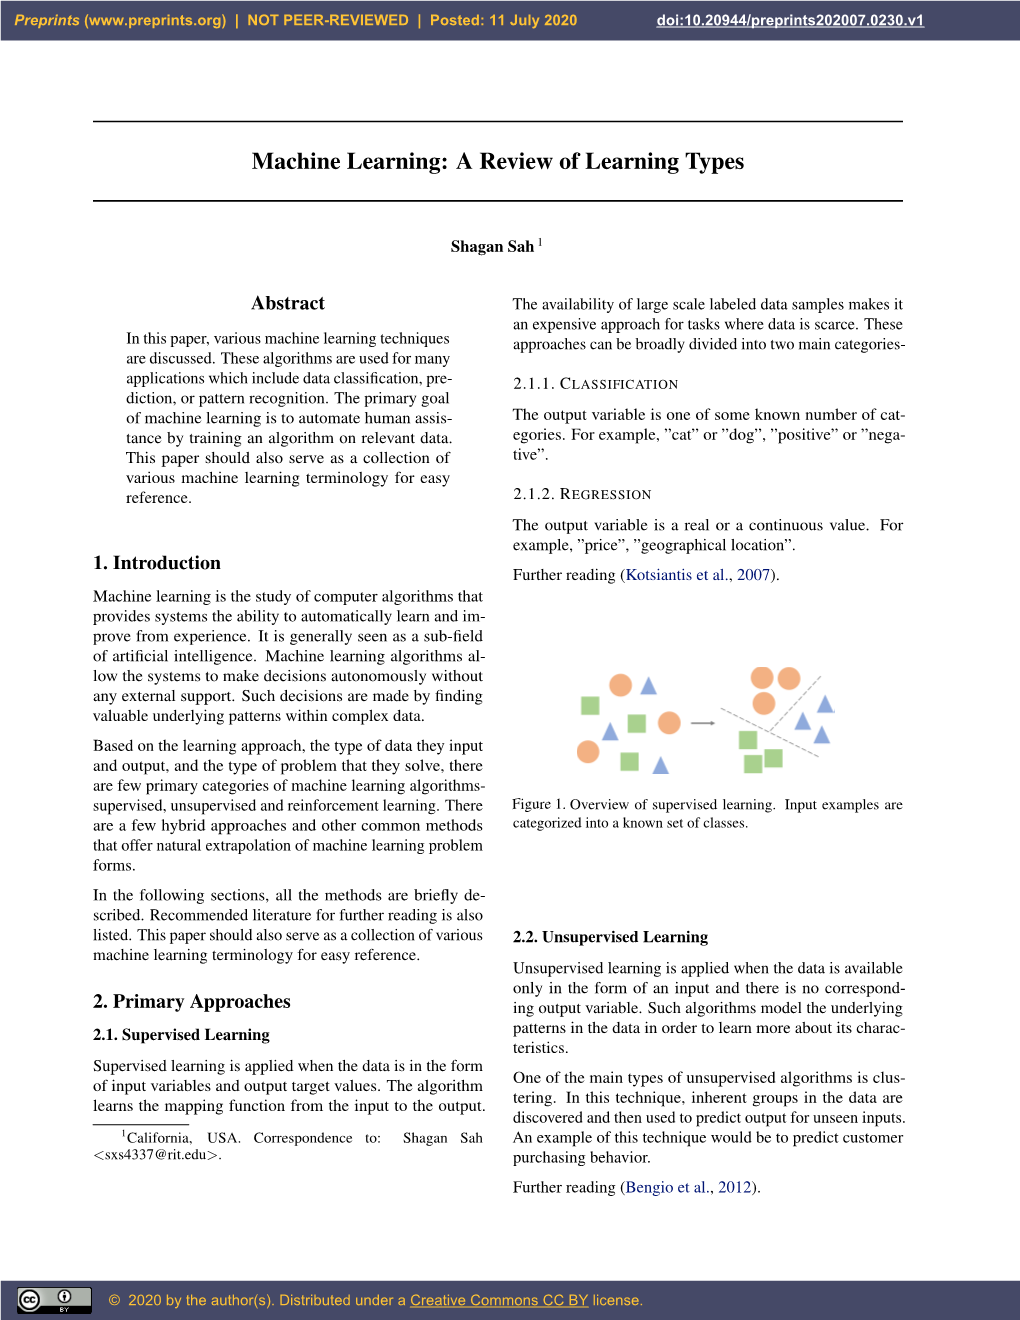 Machine Learning: a Review of Learning Types